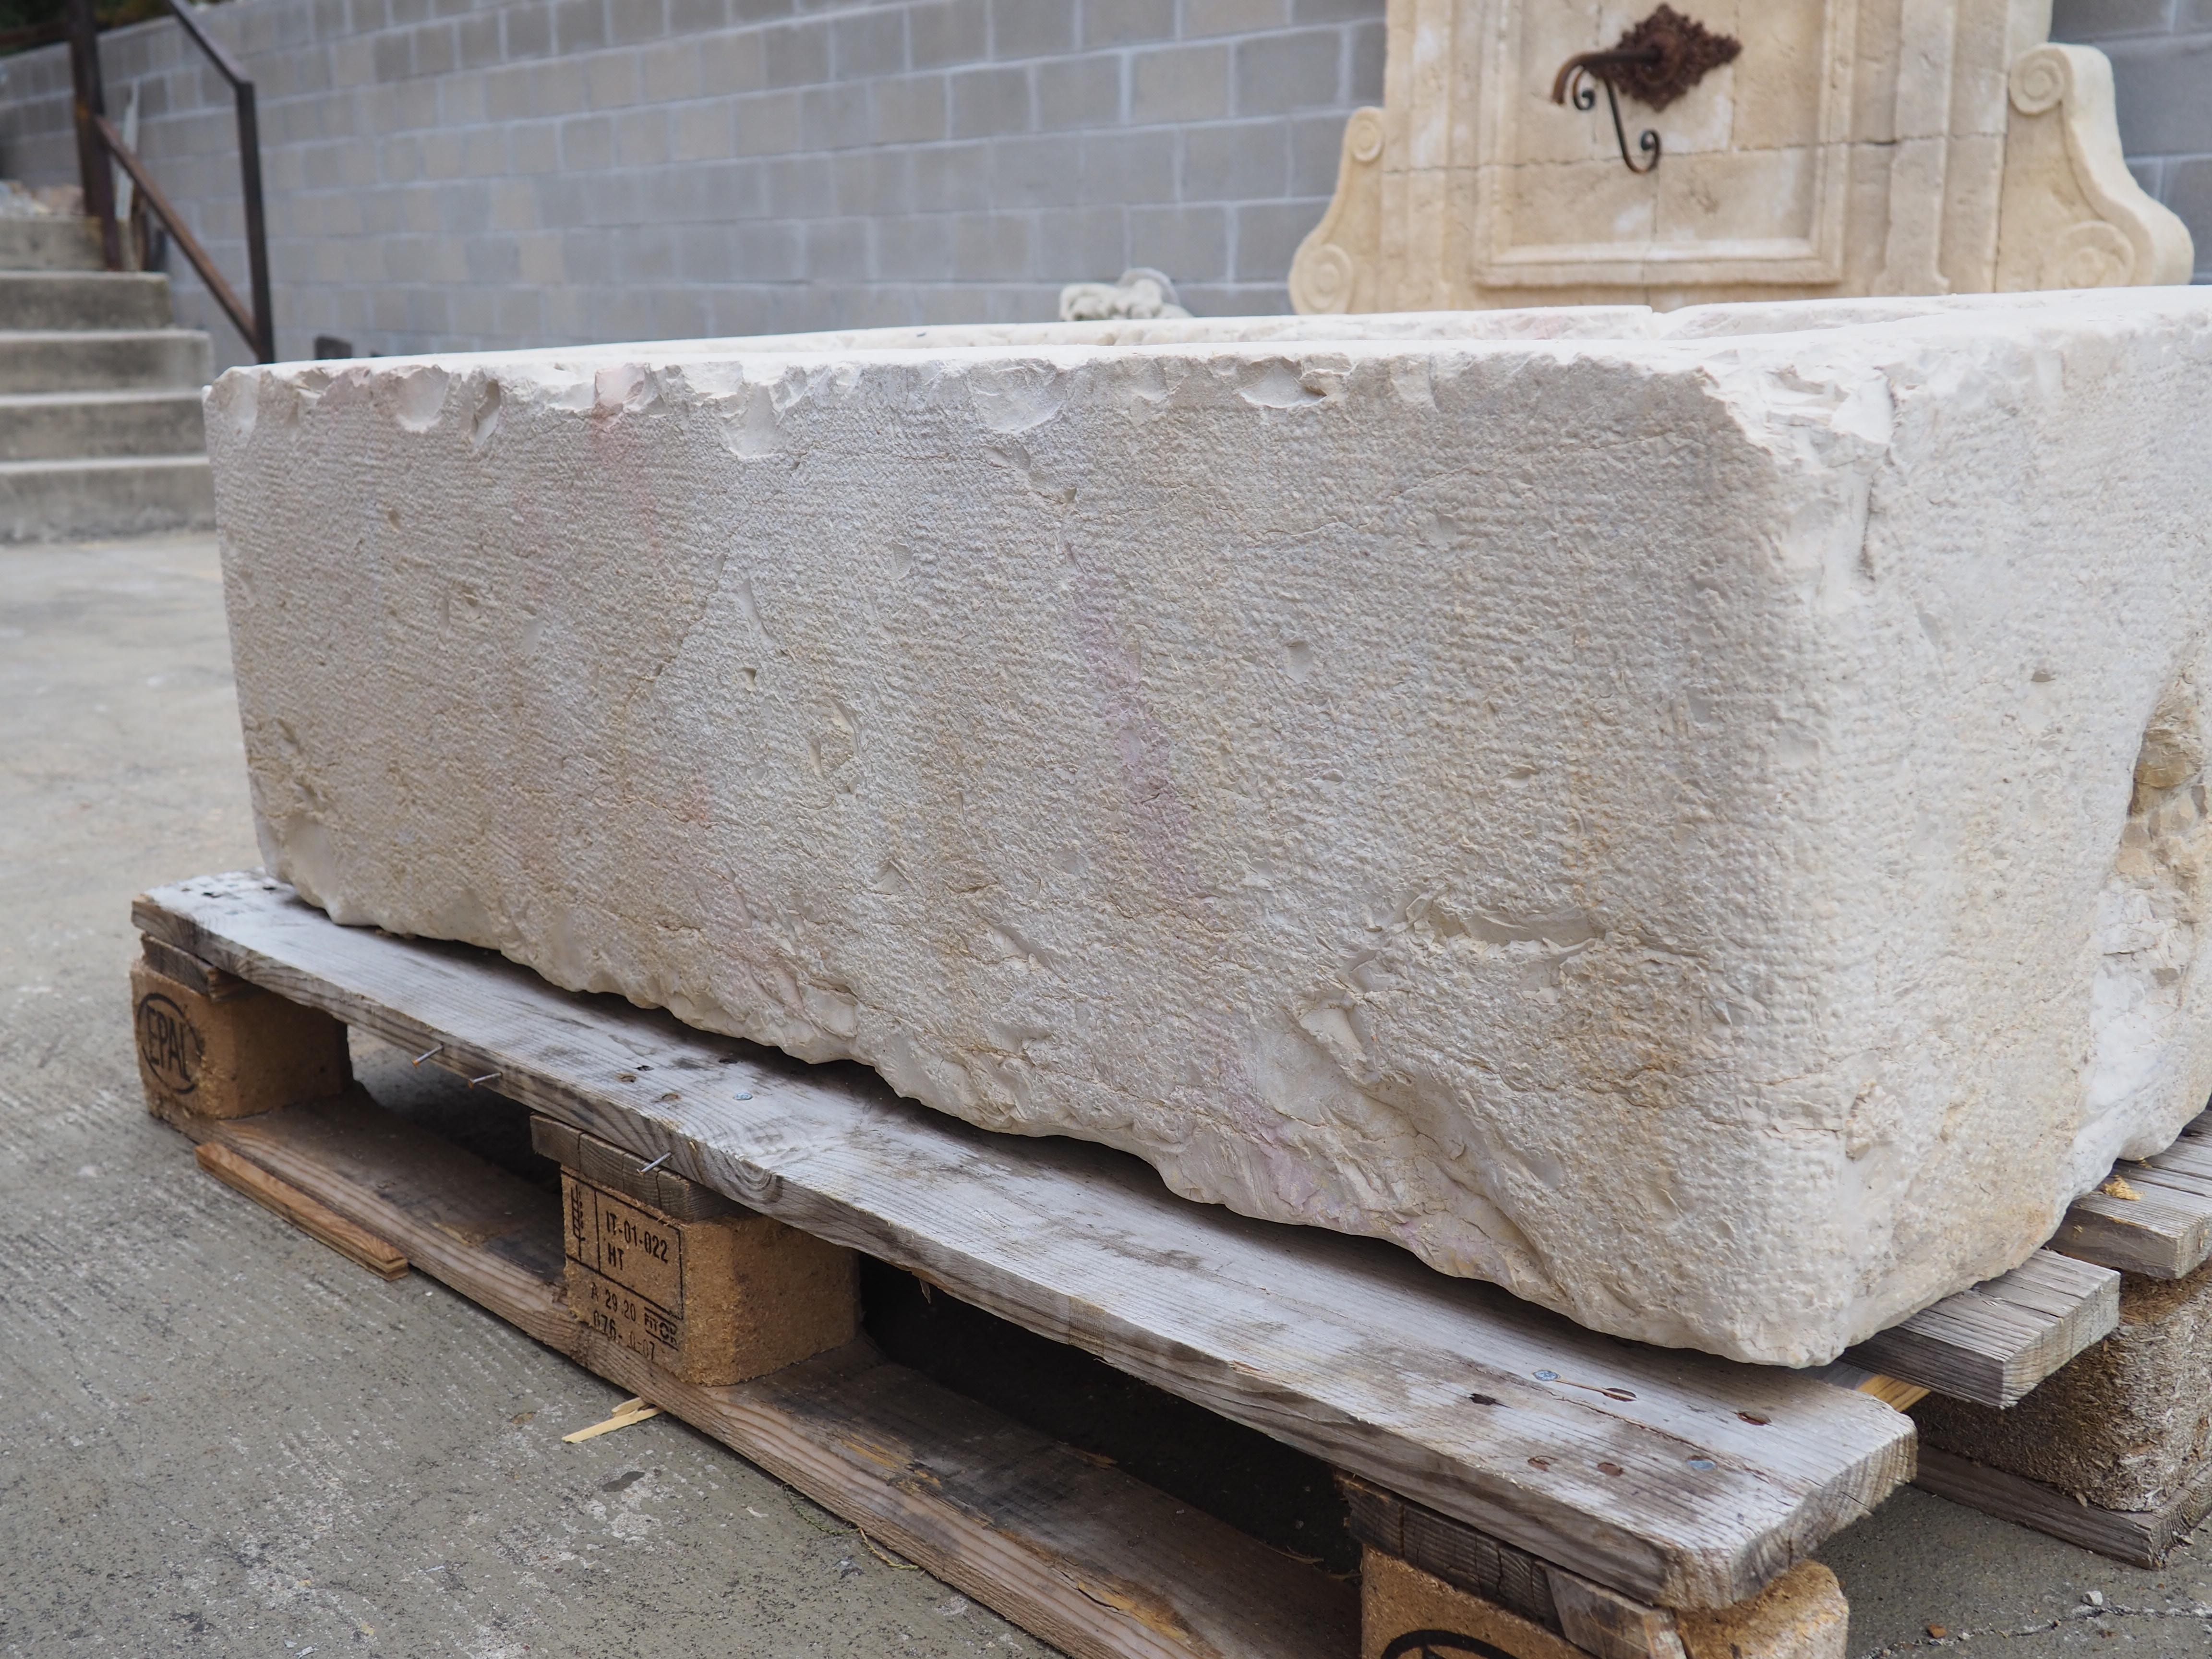 Stone troughs have been used to water livestock in rural Europe for many centuries so it’s often difficult to date them. However, it is known that they were replaced by cast iron models in the mid-19th century, placing the creation of this stone